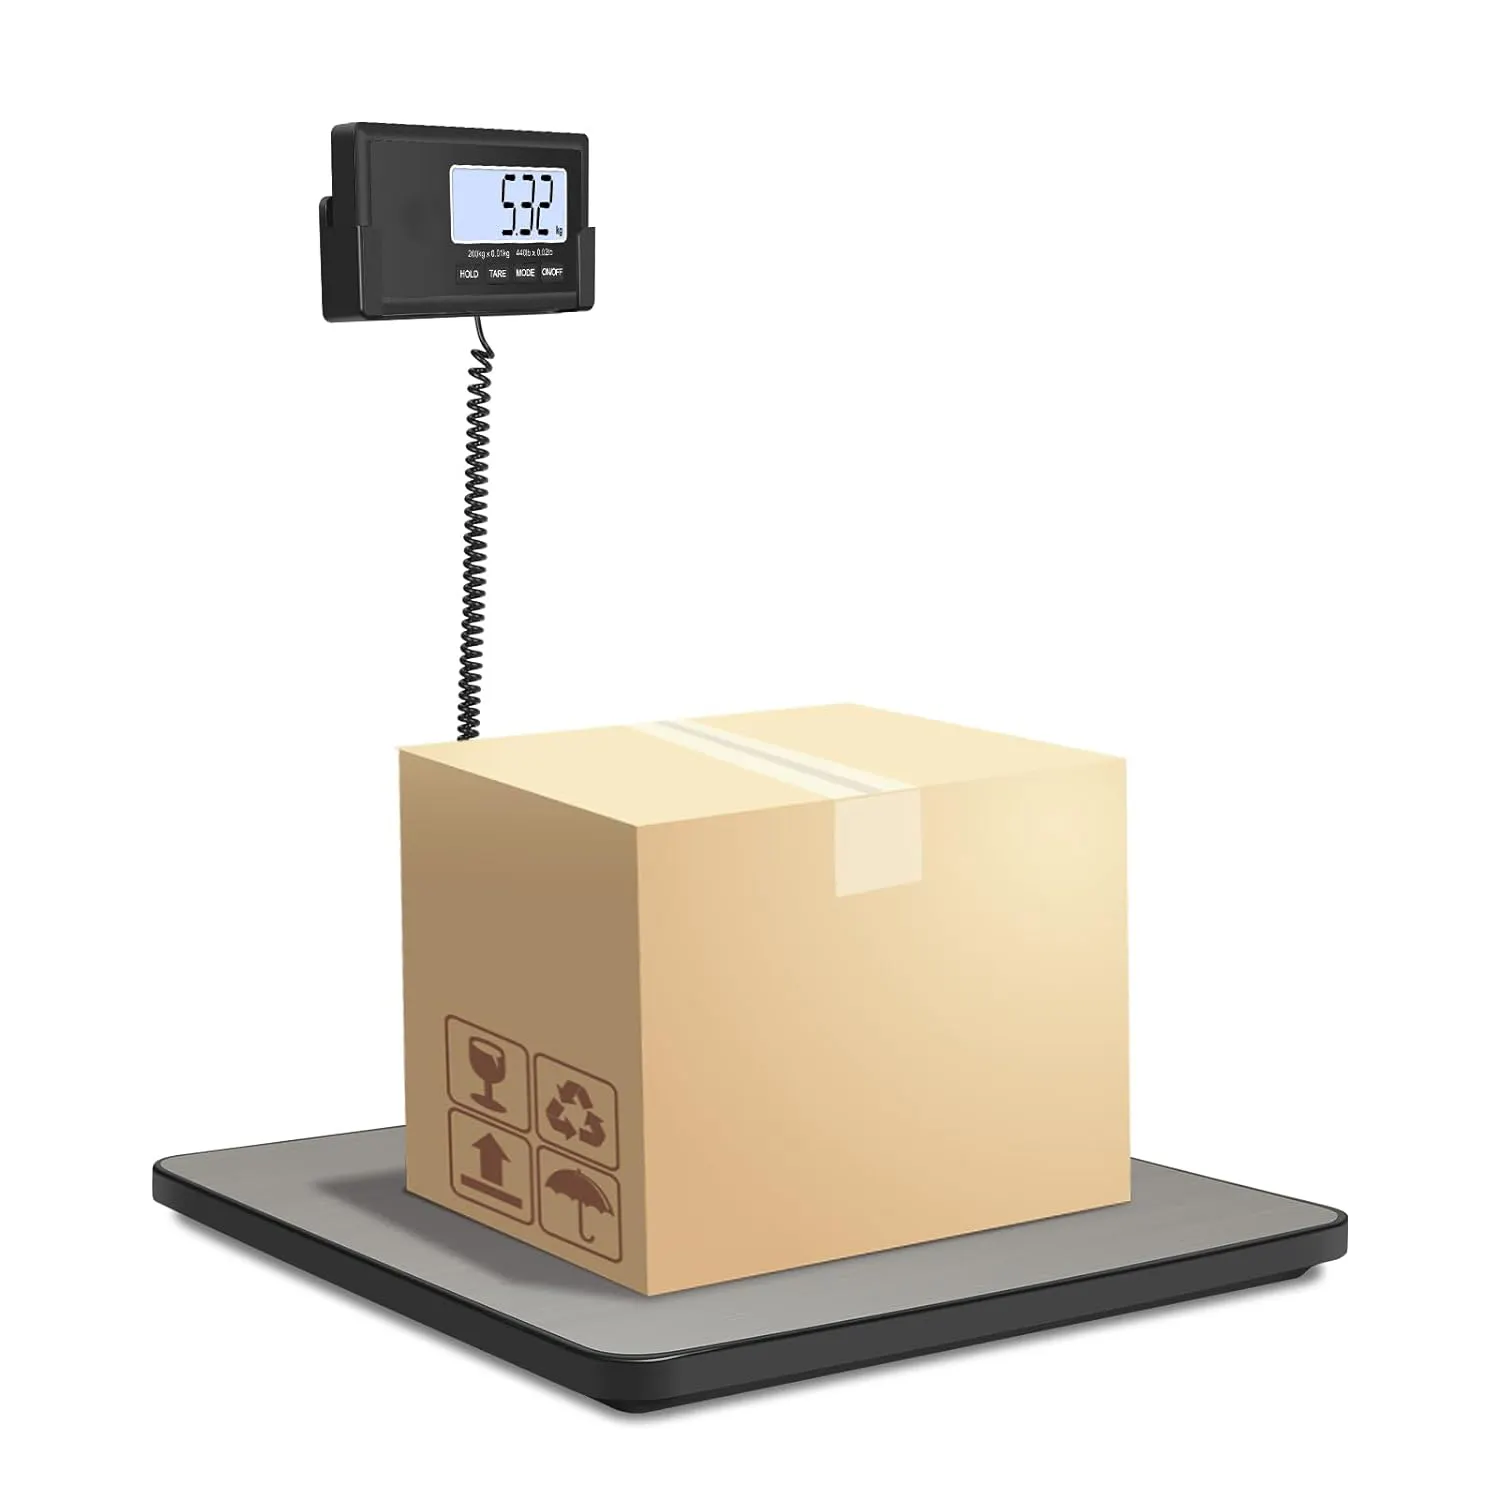 Shipping Scale 440lb/200Kg High Accuracy Digital Postal Postage Scale for Packages/Luggage/Pet/Warehouse Hold/Tare Function